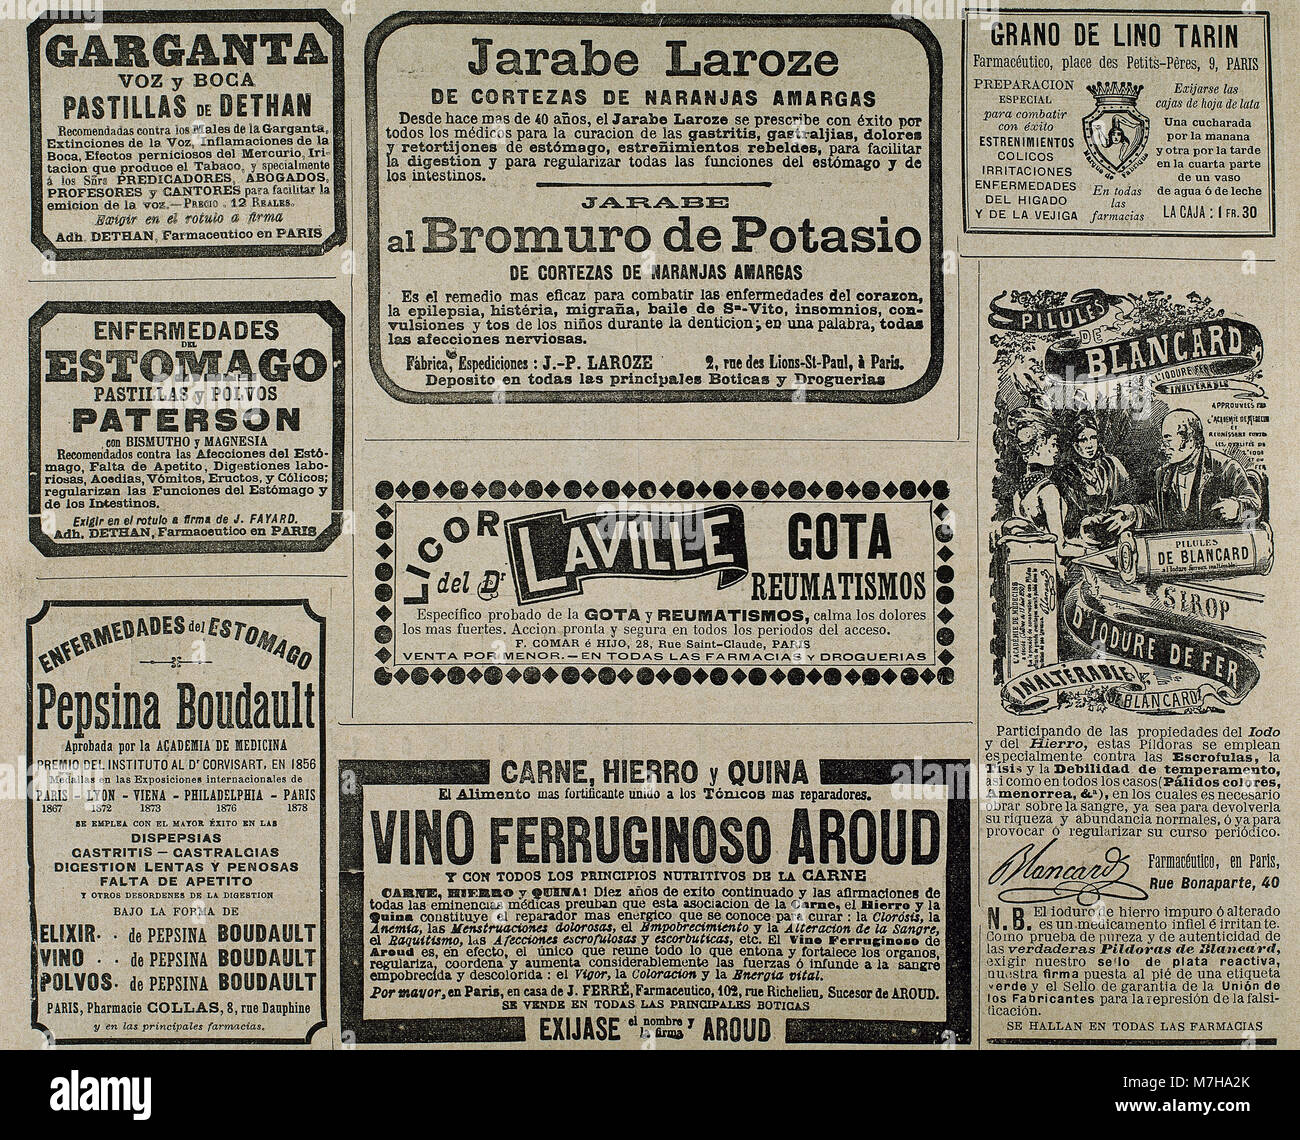 Old commercial advertisements. Medicines and medical remedies. La Ilustracion Artitsica, January 1893. Spain. Stock Photo